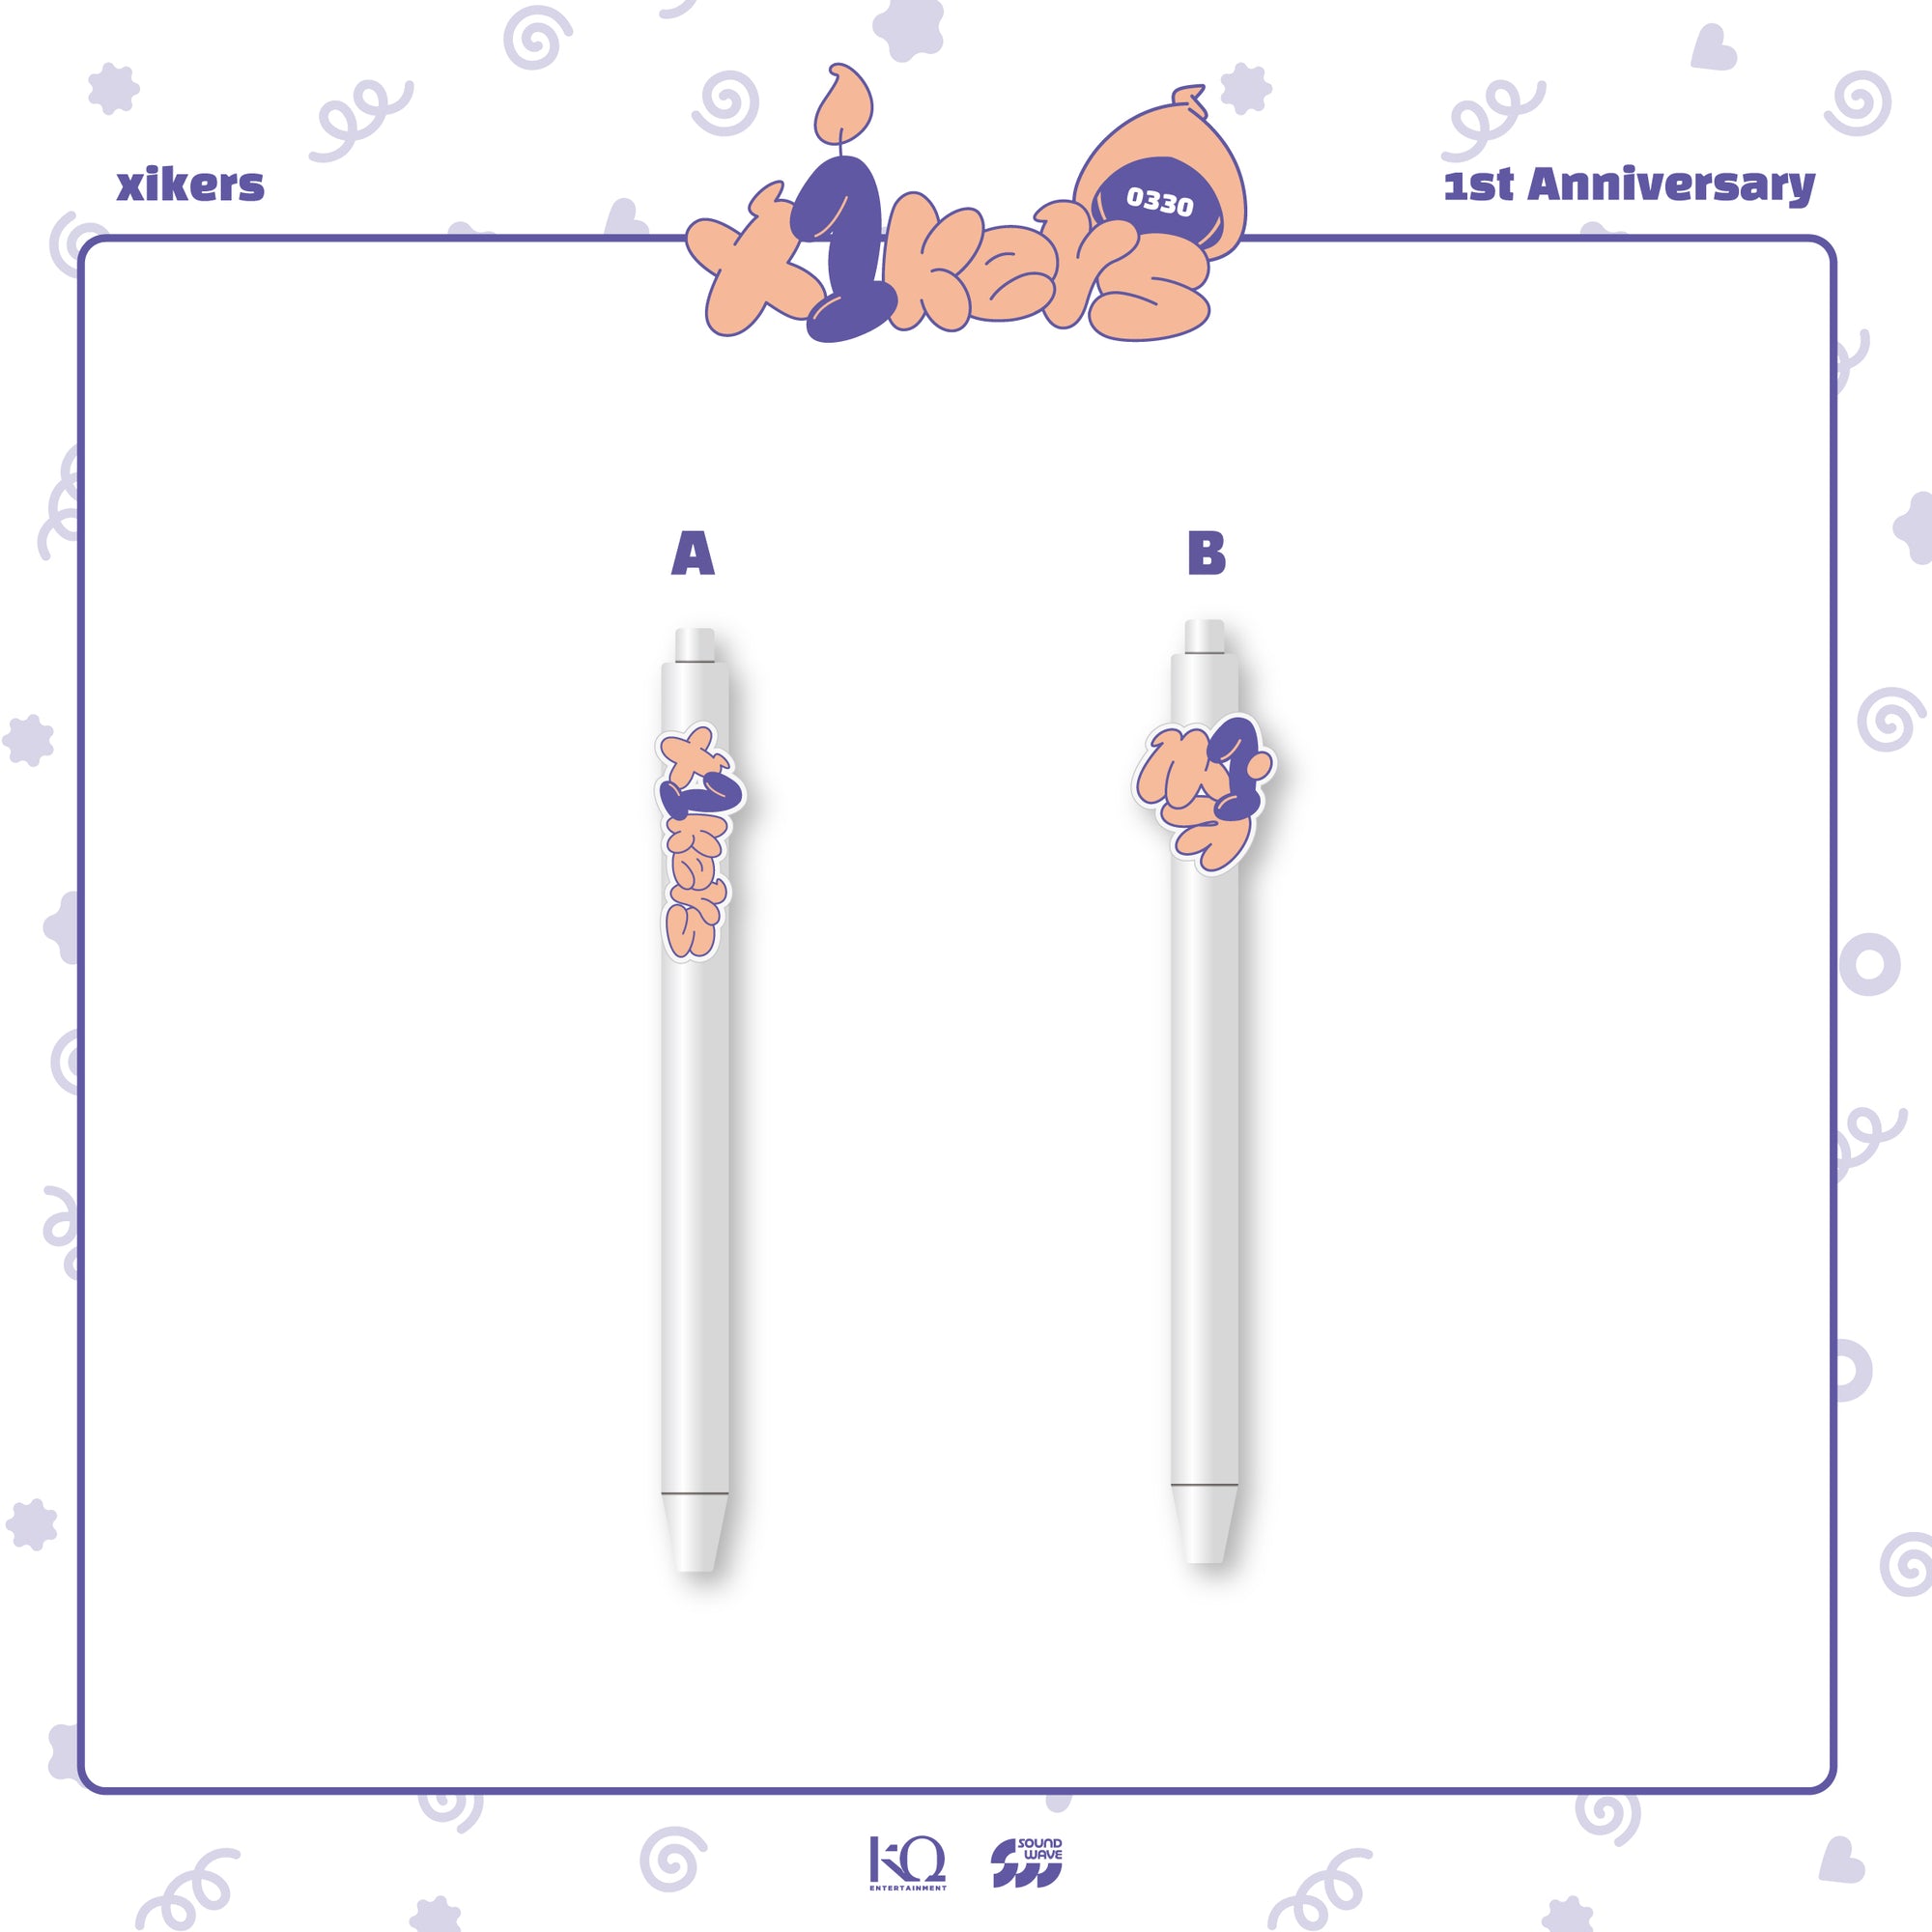 XIKERS - 'x1kers' 1ST ANNIVERSARY OFFICIAL MD x1kers GEL PEN